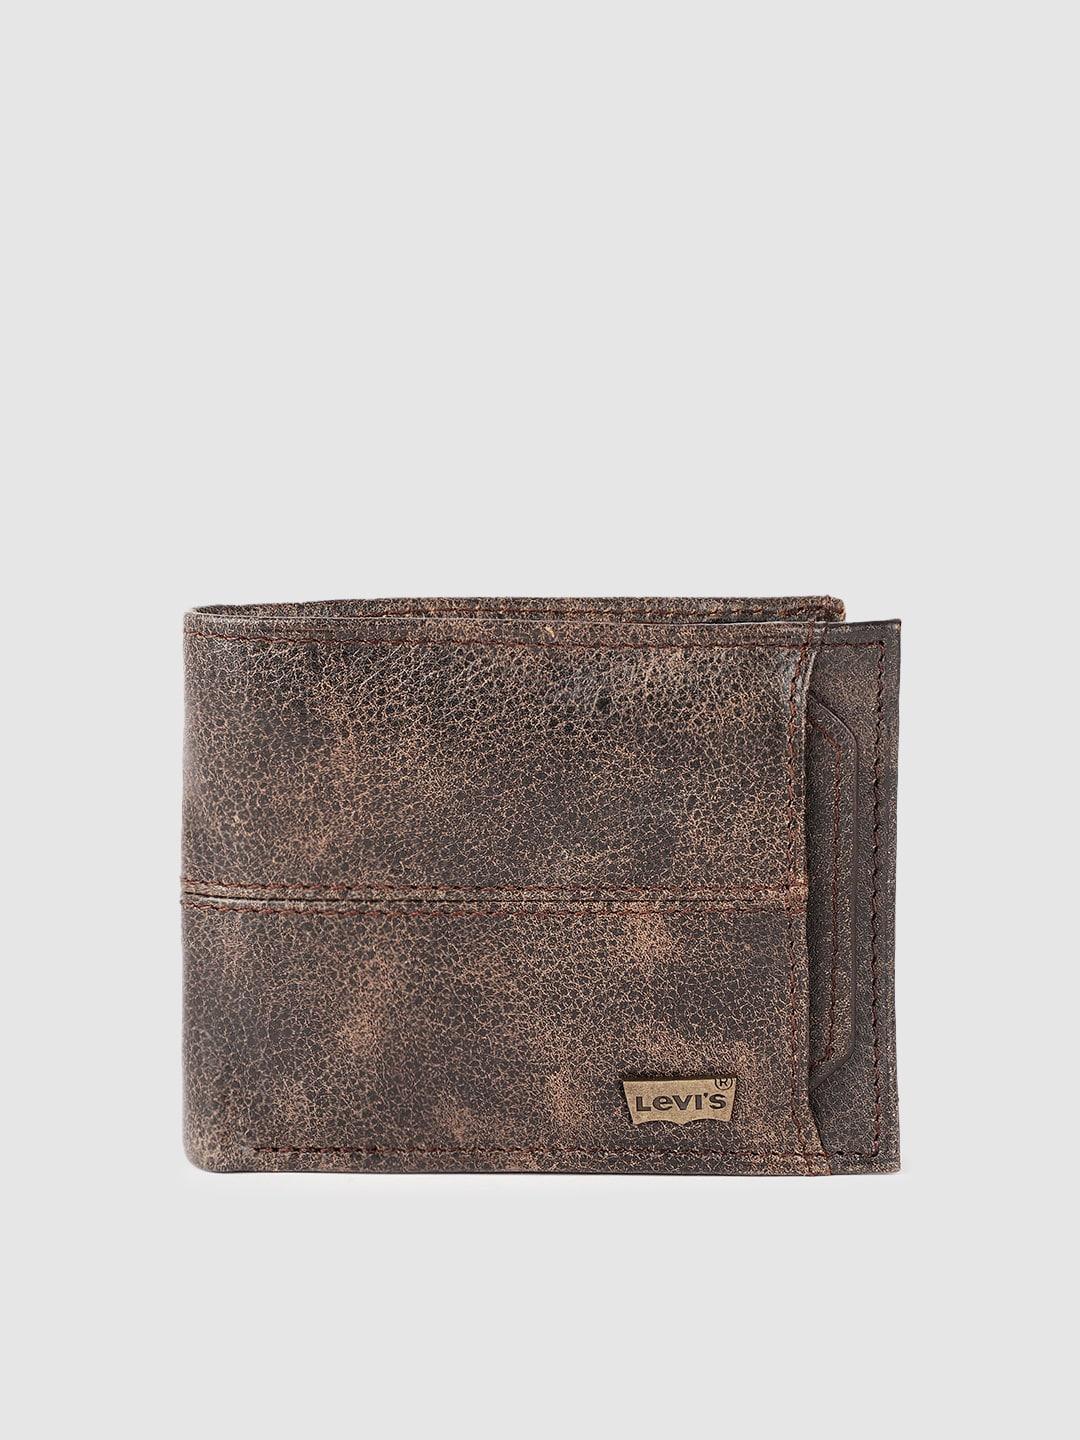 levis-men-brown-textured-leather-two-fold-wallet